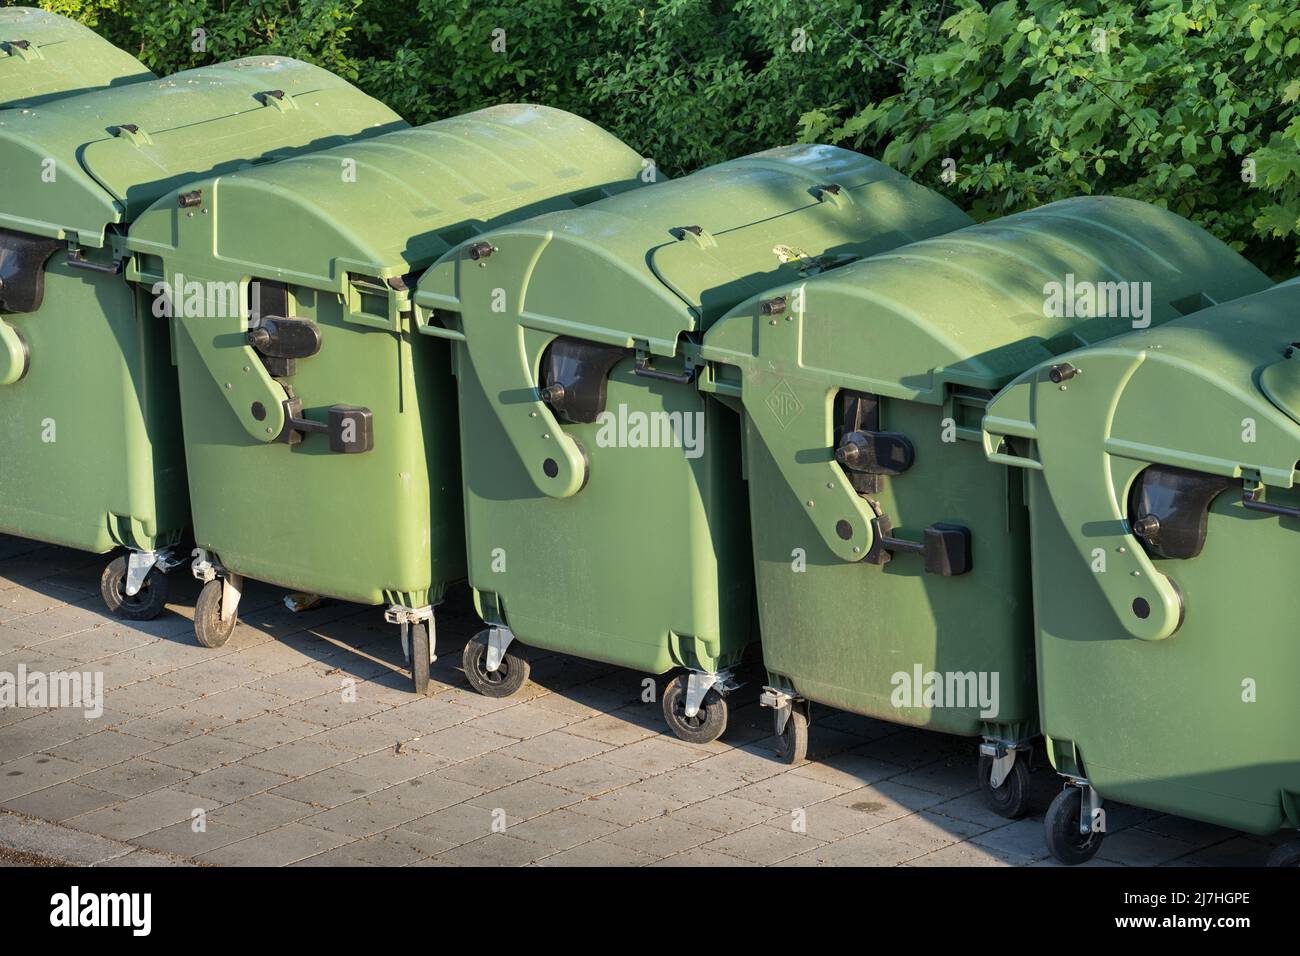 The litter waste bin containers in which the waste was collected are ready for removal or emptying. Stock Photo